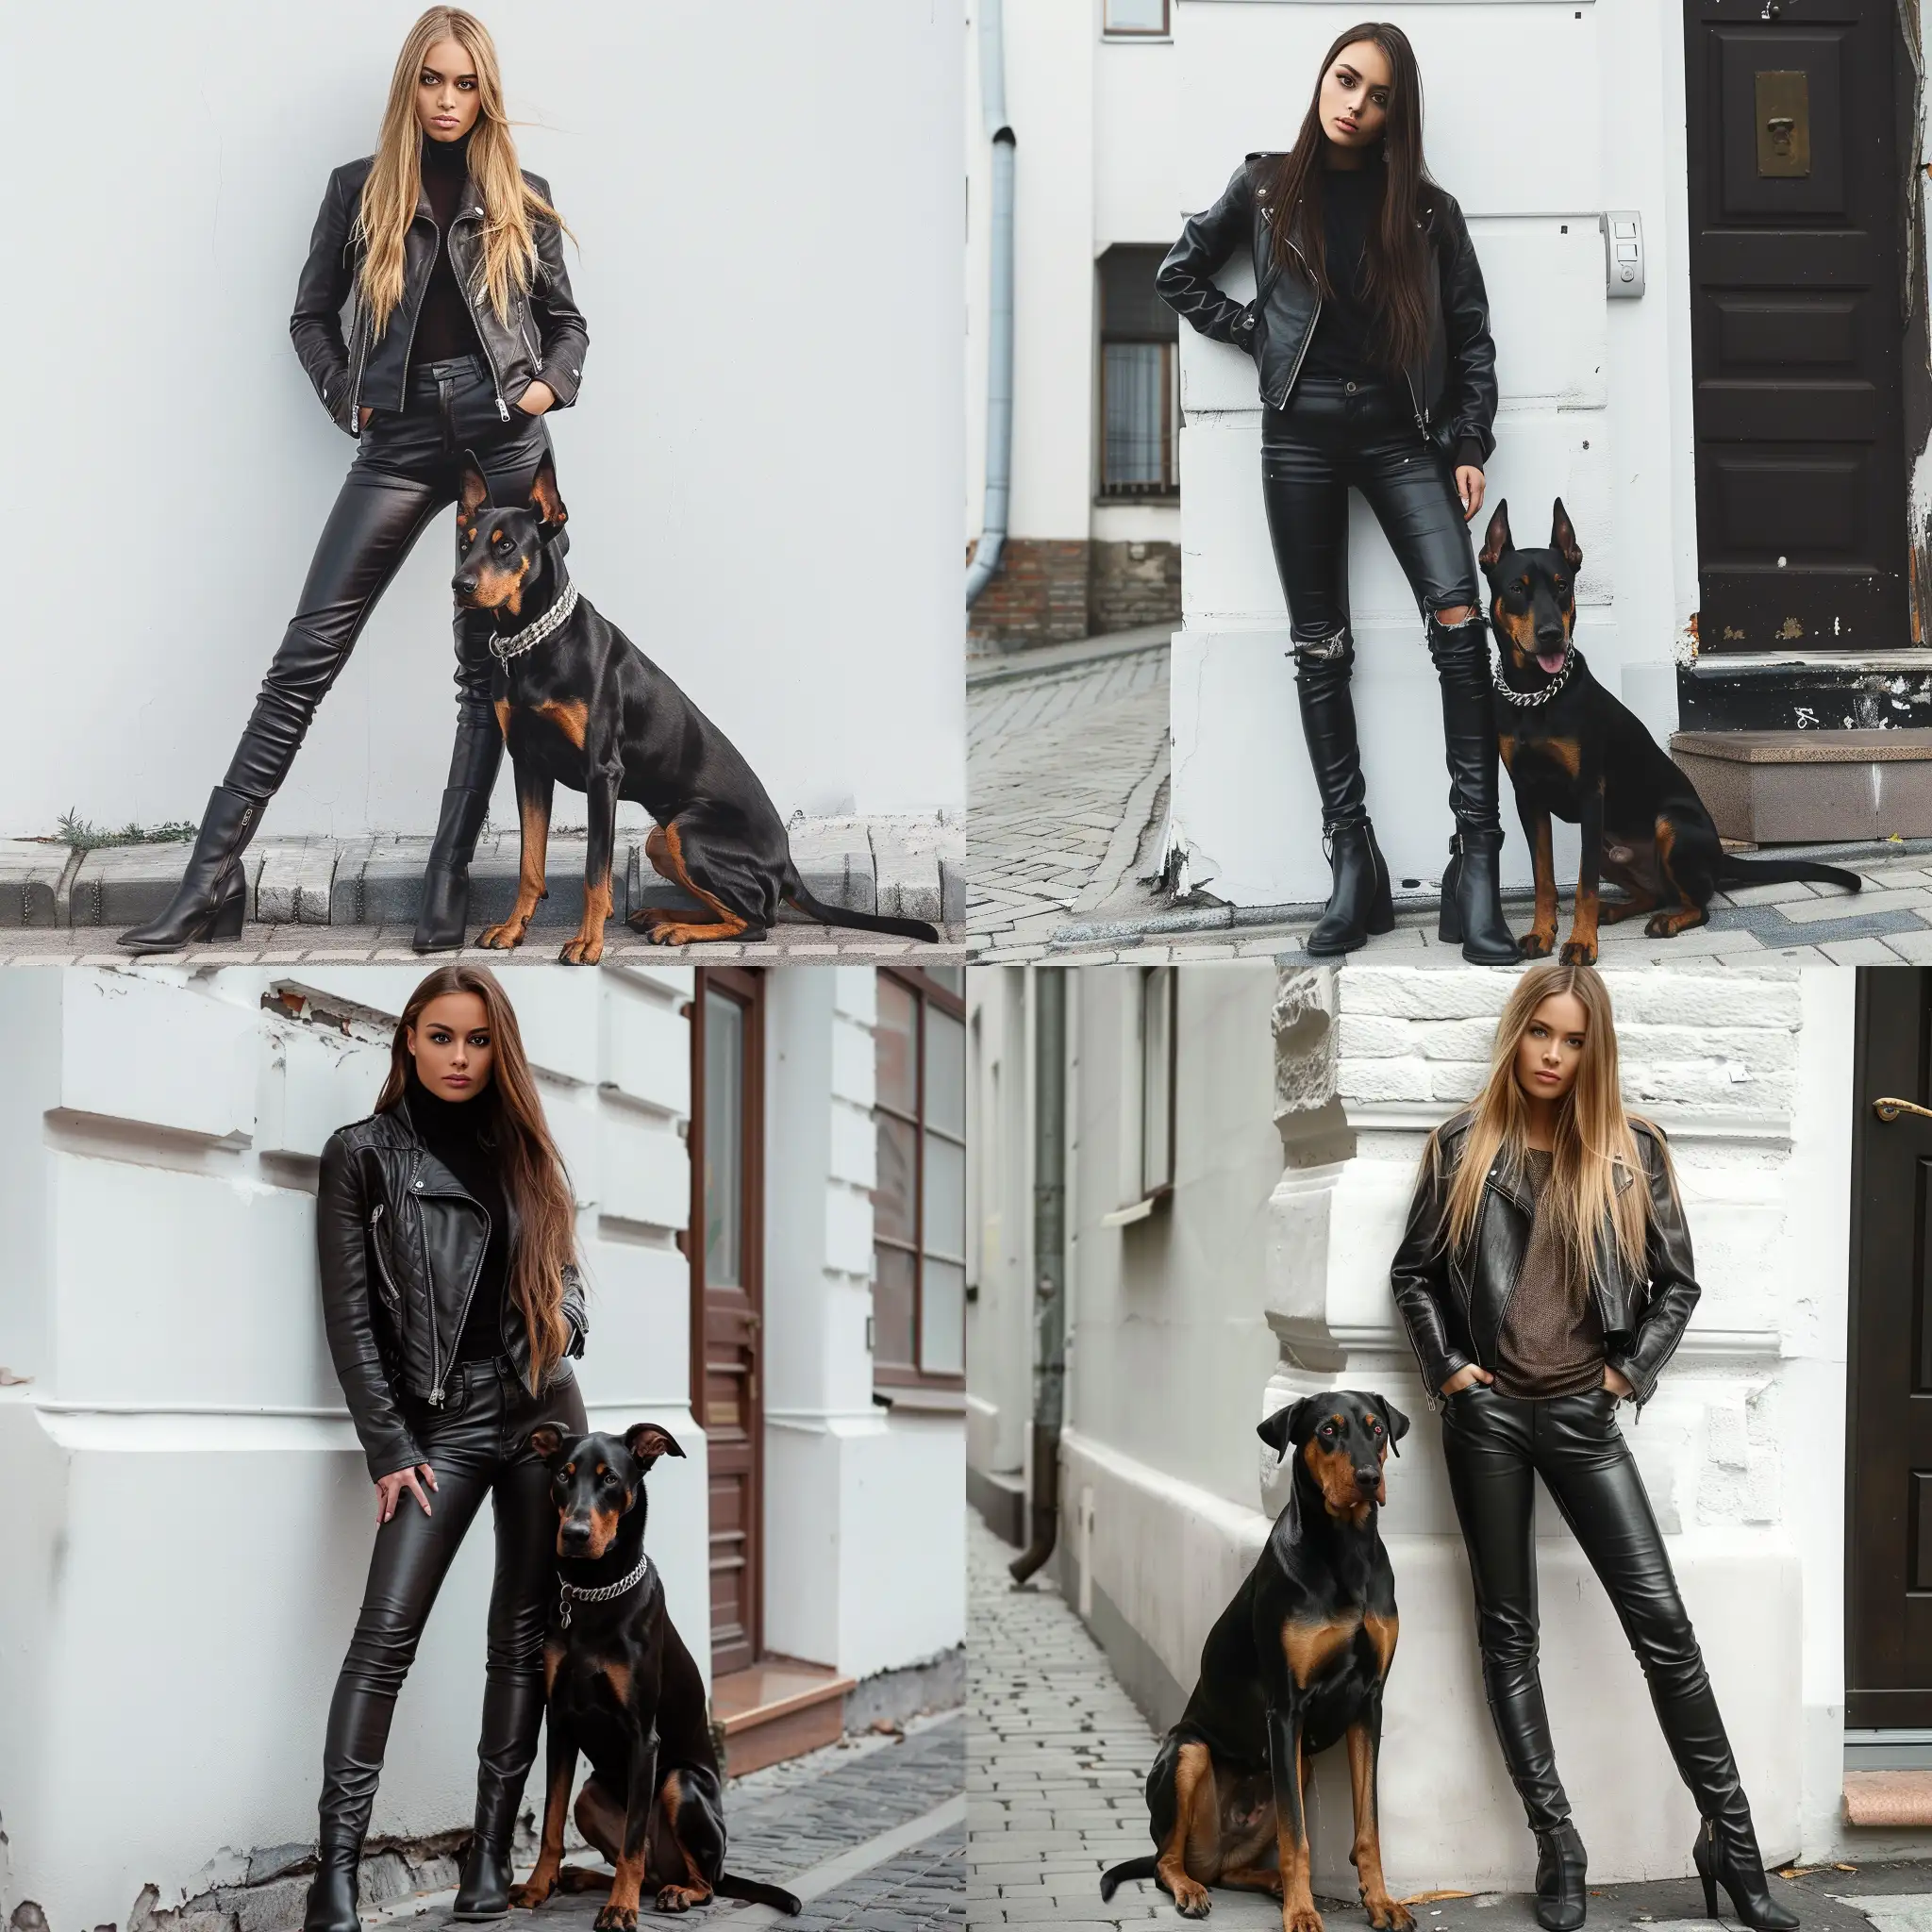 Girl stands On the street against a white wall stands with a Doberman in leather pants and jacket realistic photo face looks into the camera clearly visible detail realistic photo 